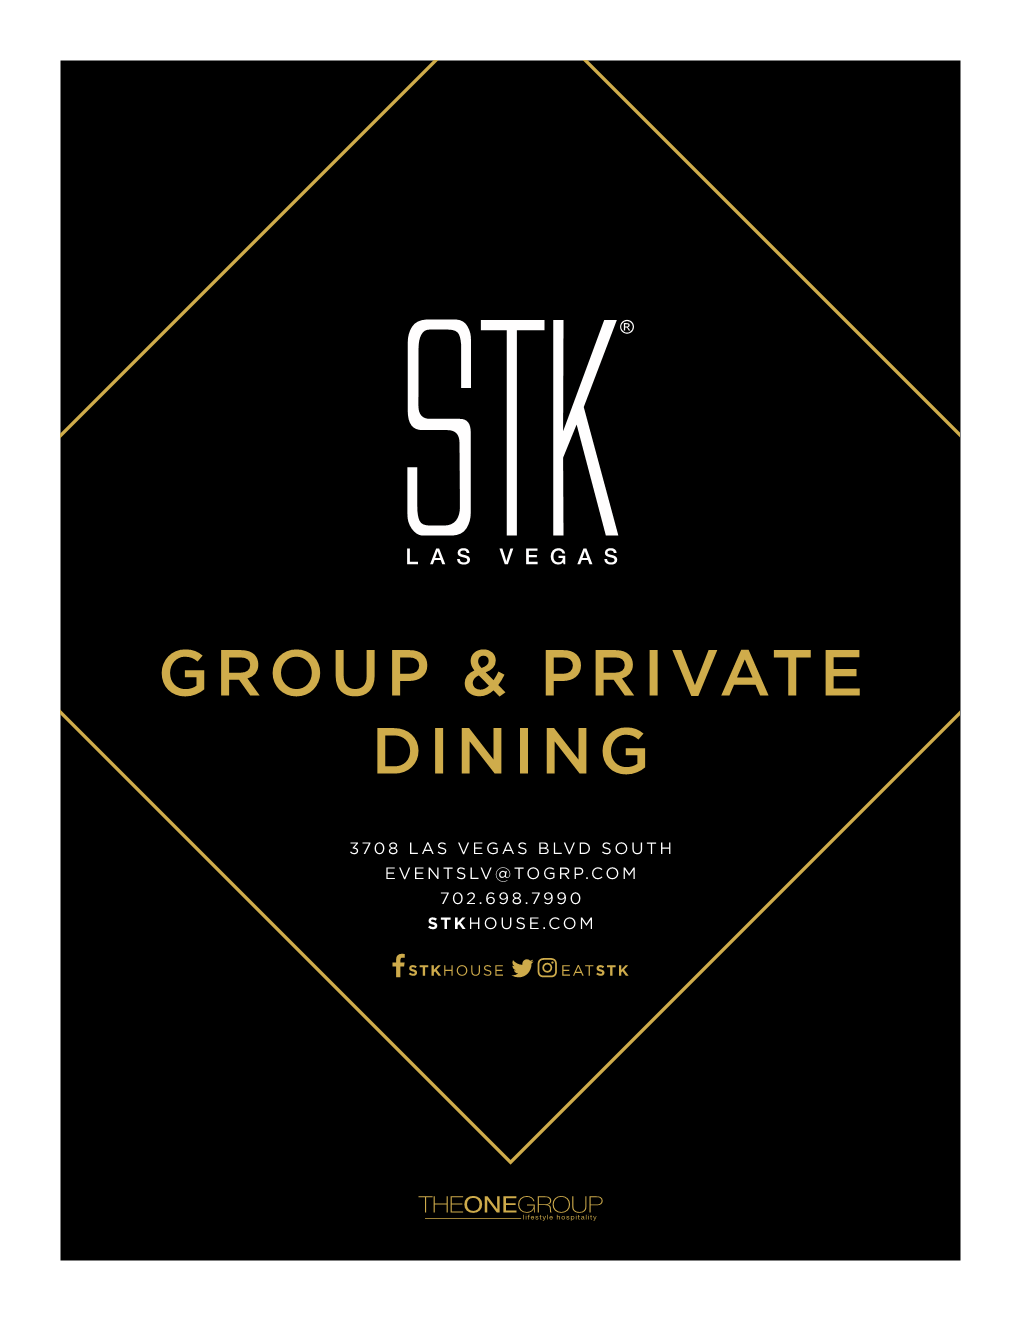 Group & Private Dining